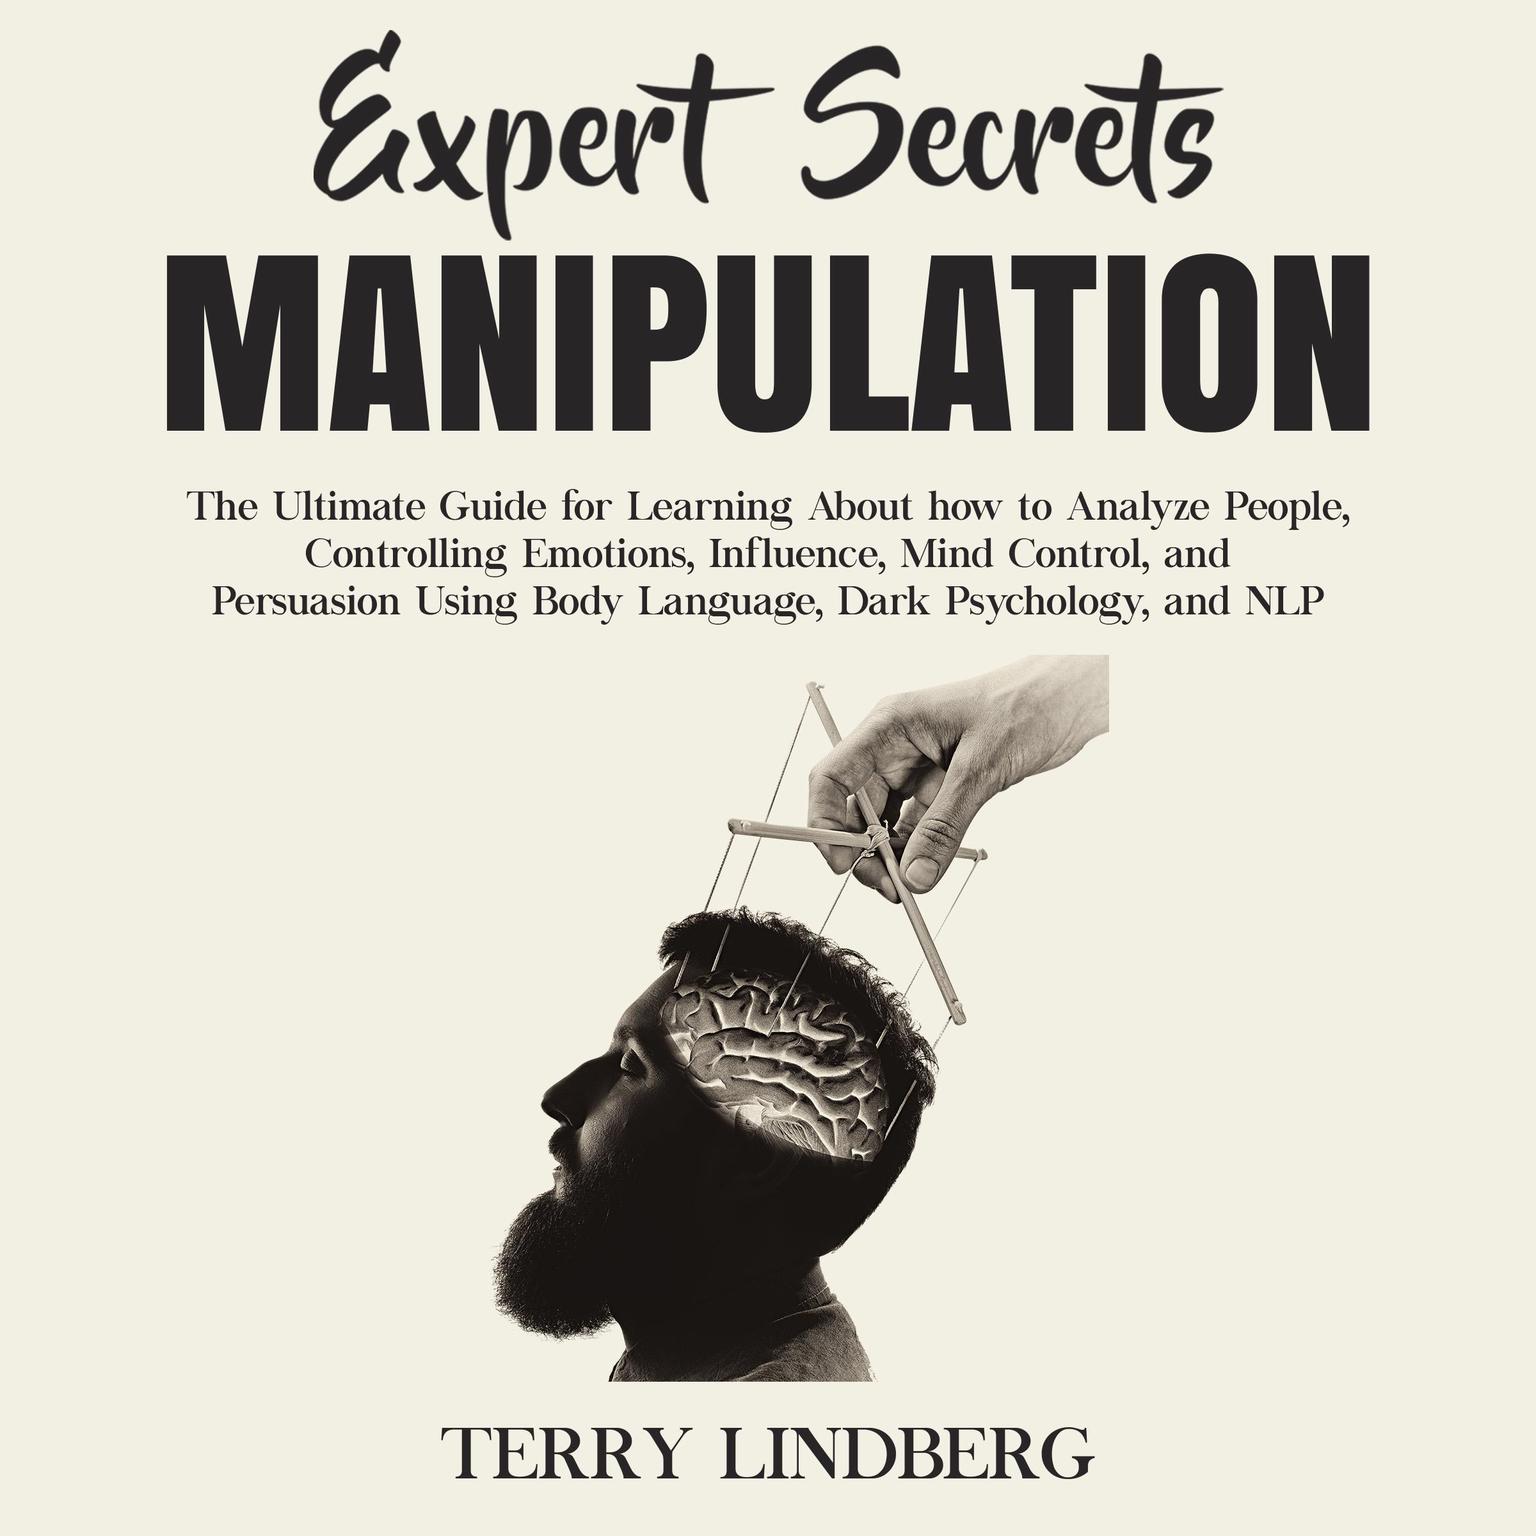 Expert Secrets – Manipulation: The Ultimate Guide for Learning About how to Analyze People, Controlling Emotions, Influence, Mind Control, and Persuasion Using Body Language, Dark Psychology, and NLP.: The Ultimate Guide for Learning About how to Analyze People, Controlling Emotions, Influence, Mind Control, and Persuasion Using Body Language, Dark Psychology, and NLP Audiobook, by Terry Lindberg